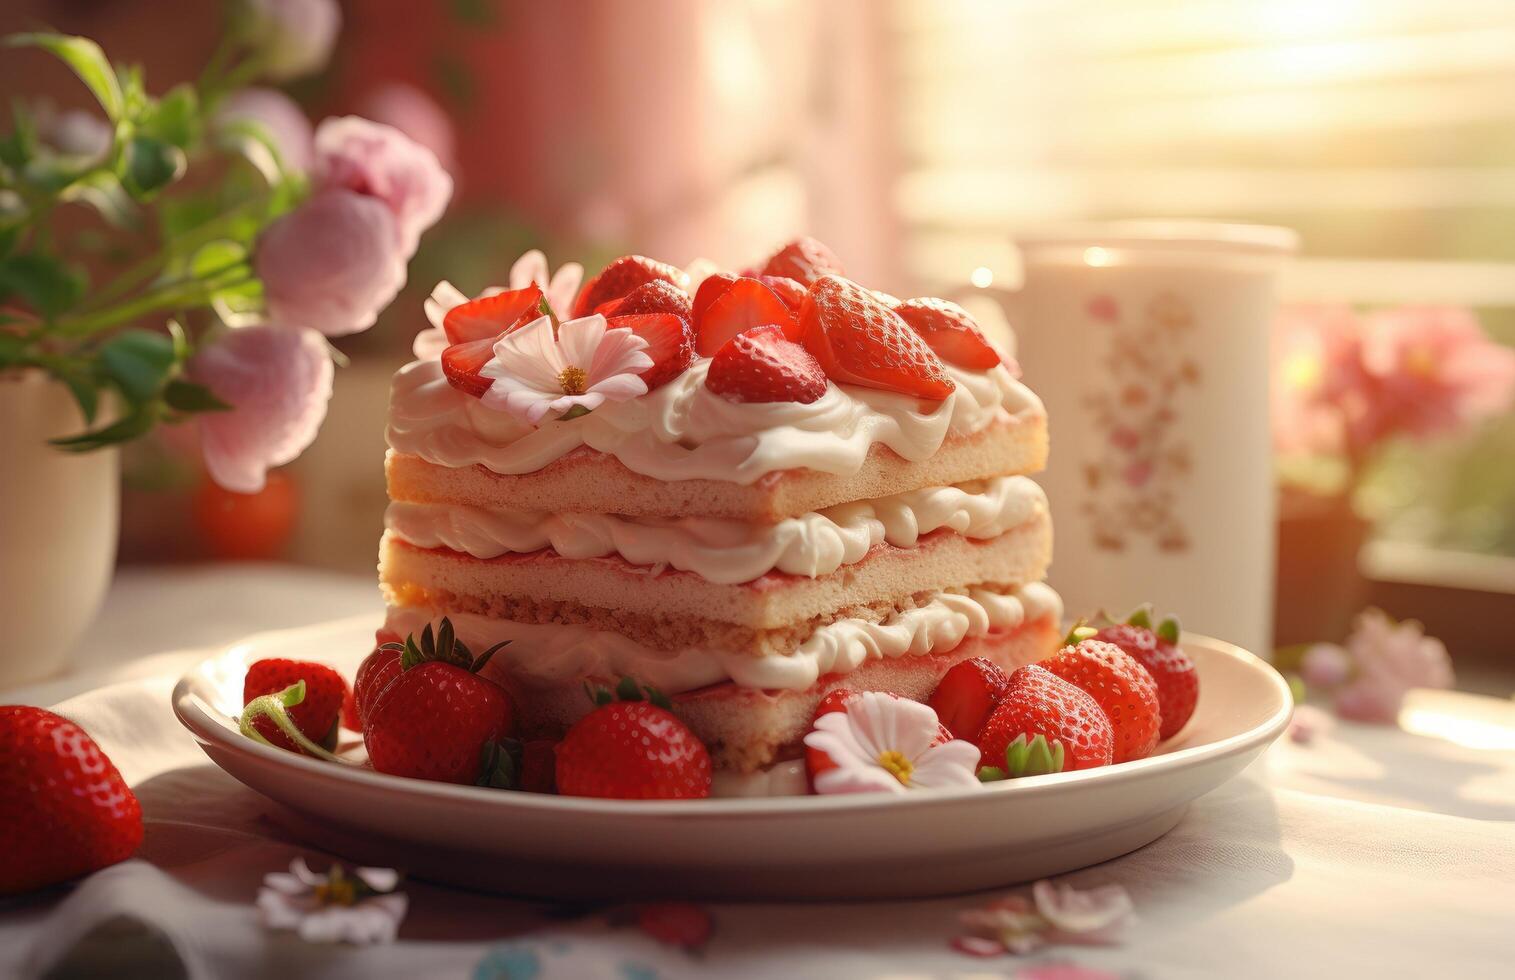 AI generated a strawberry cake is being placed on a plate next to a flower photo